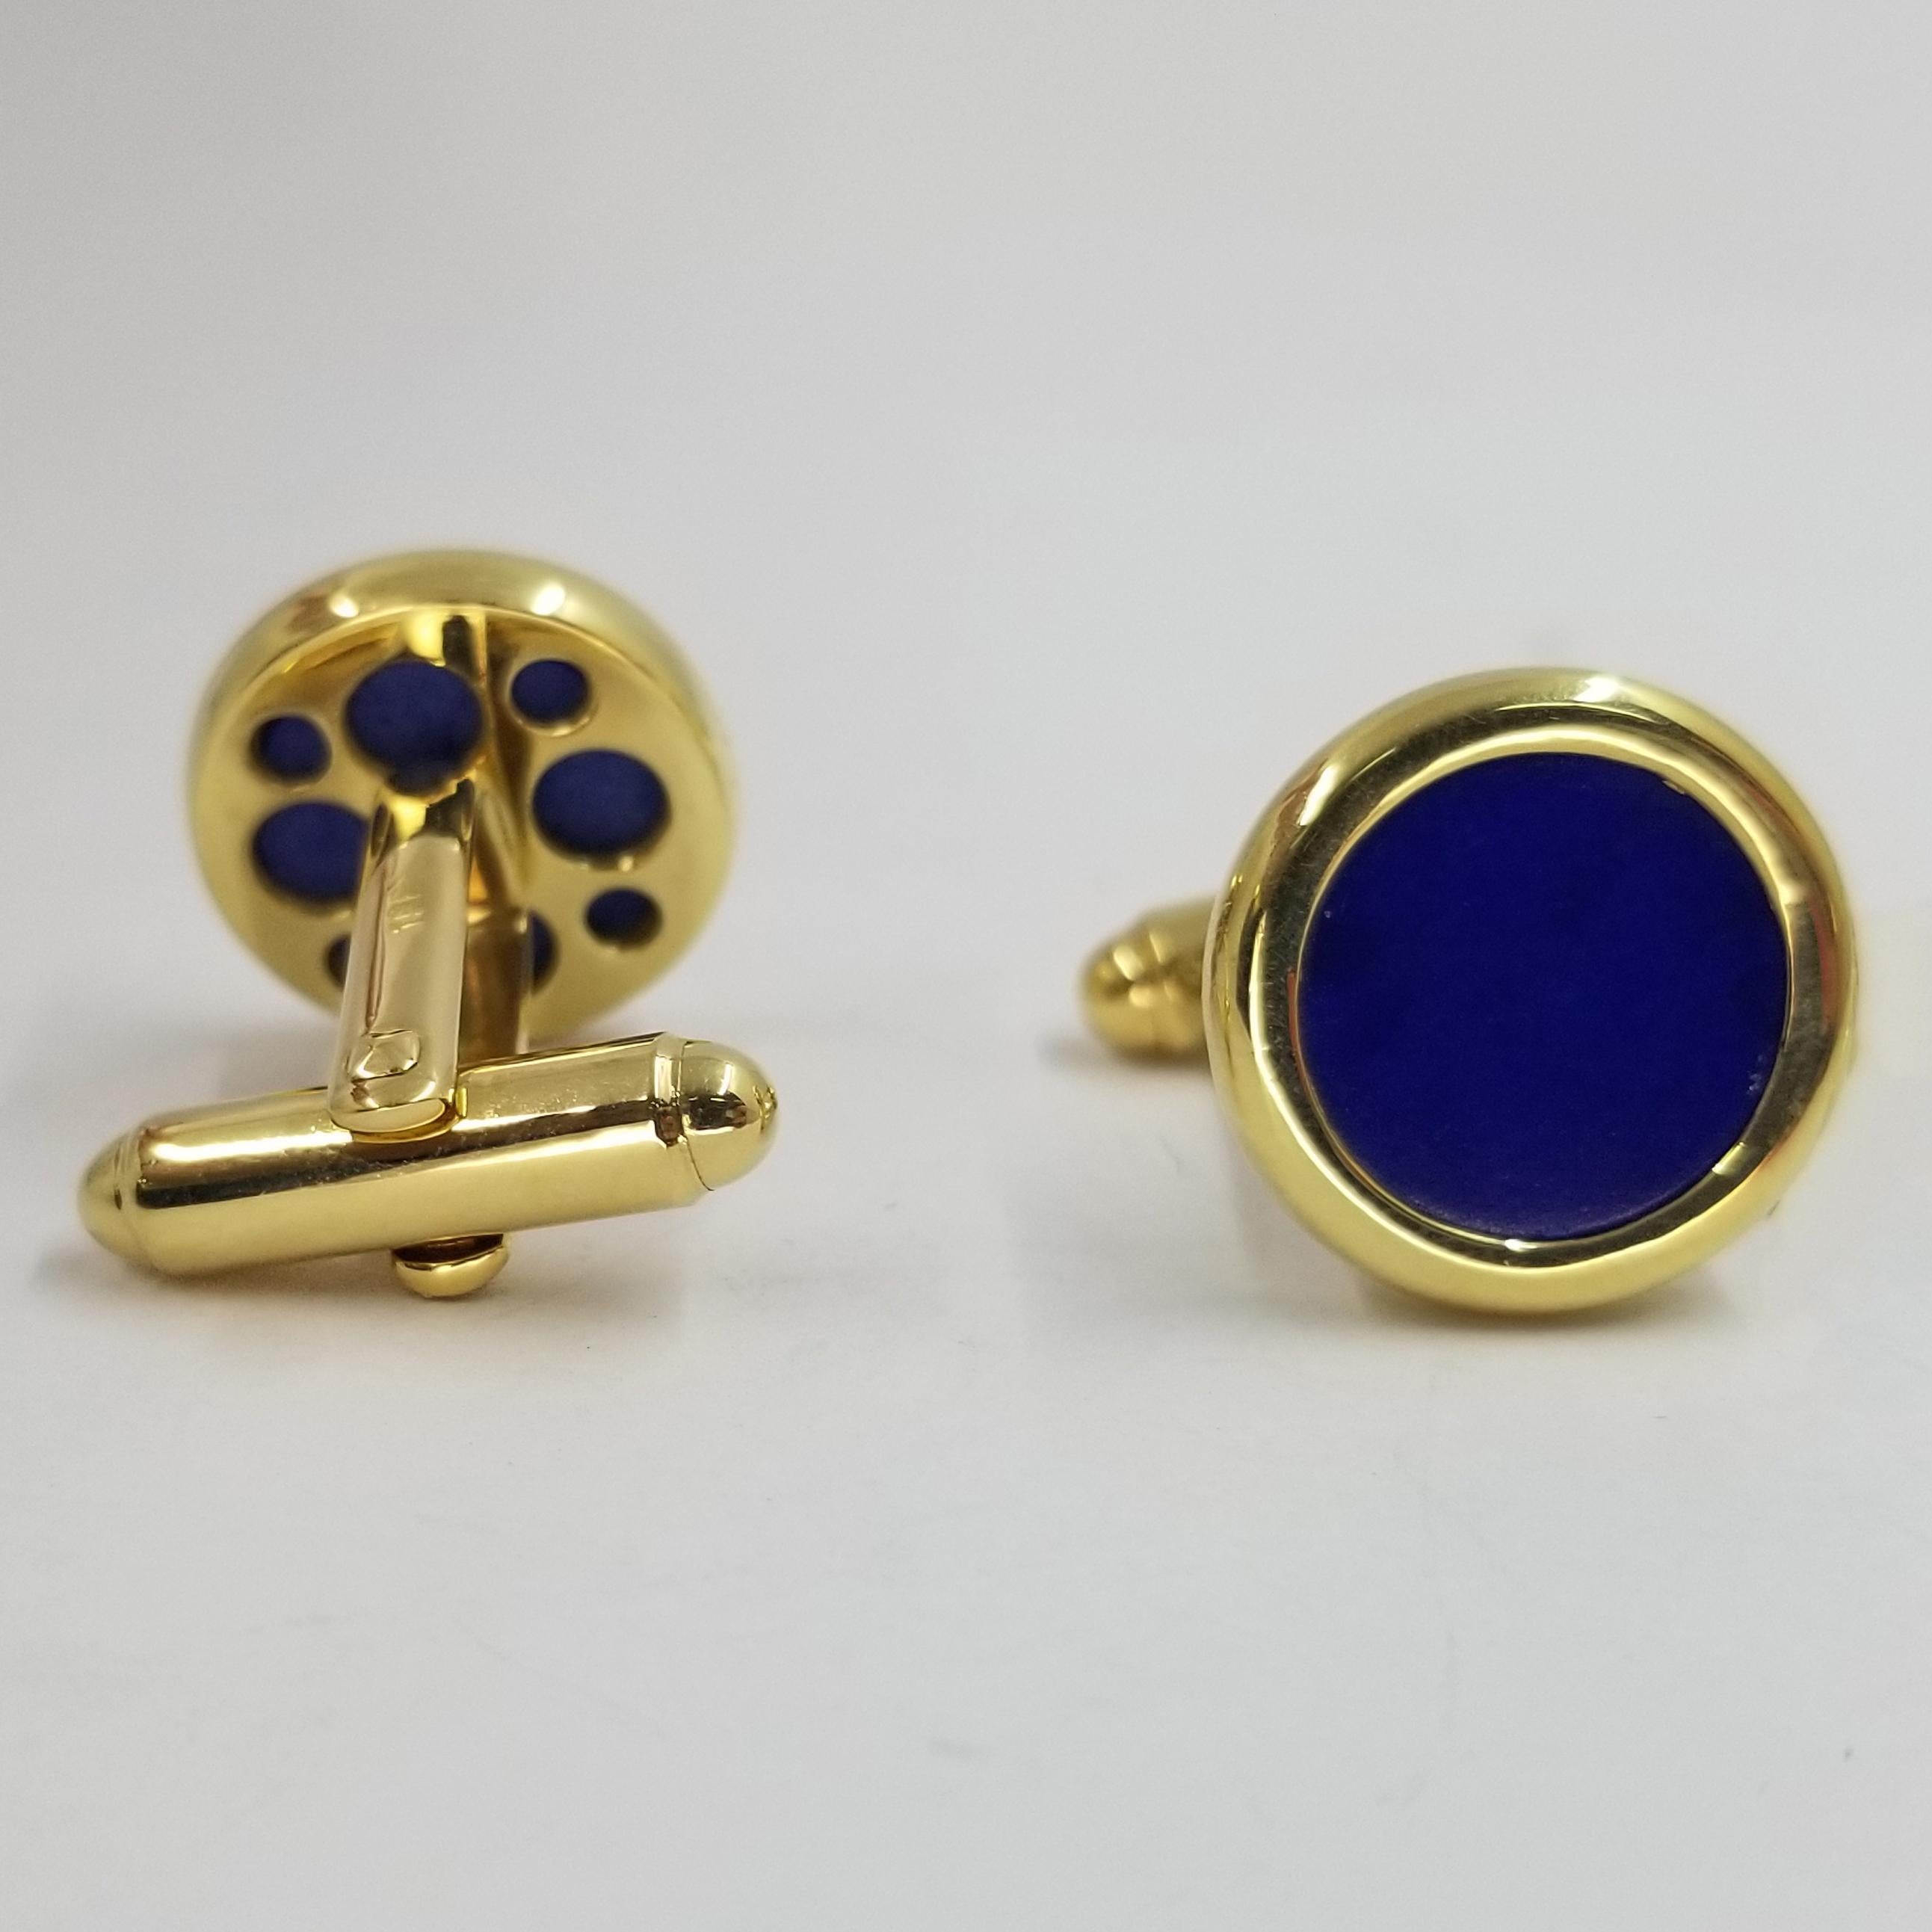 Set of 2 cufflinks crafted in 18 karat yellow gold (stamped). The fronts are polished bezels with flat circular Lapis Lazuli inlay. The backs are a hinged torpedo style for easy dressing.